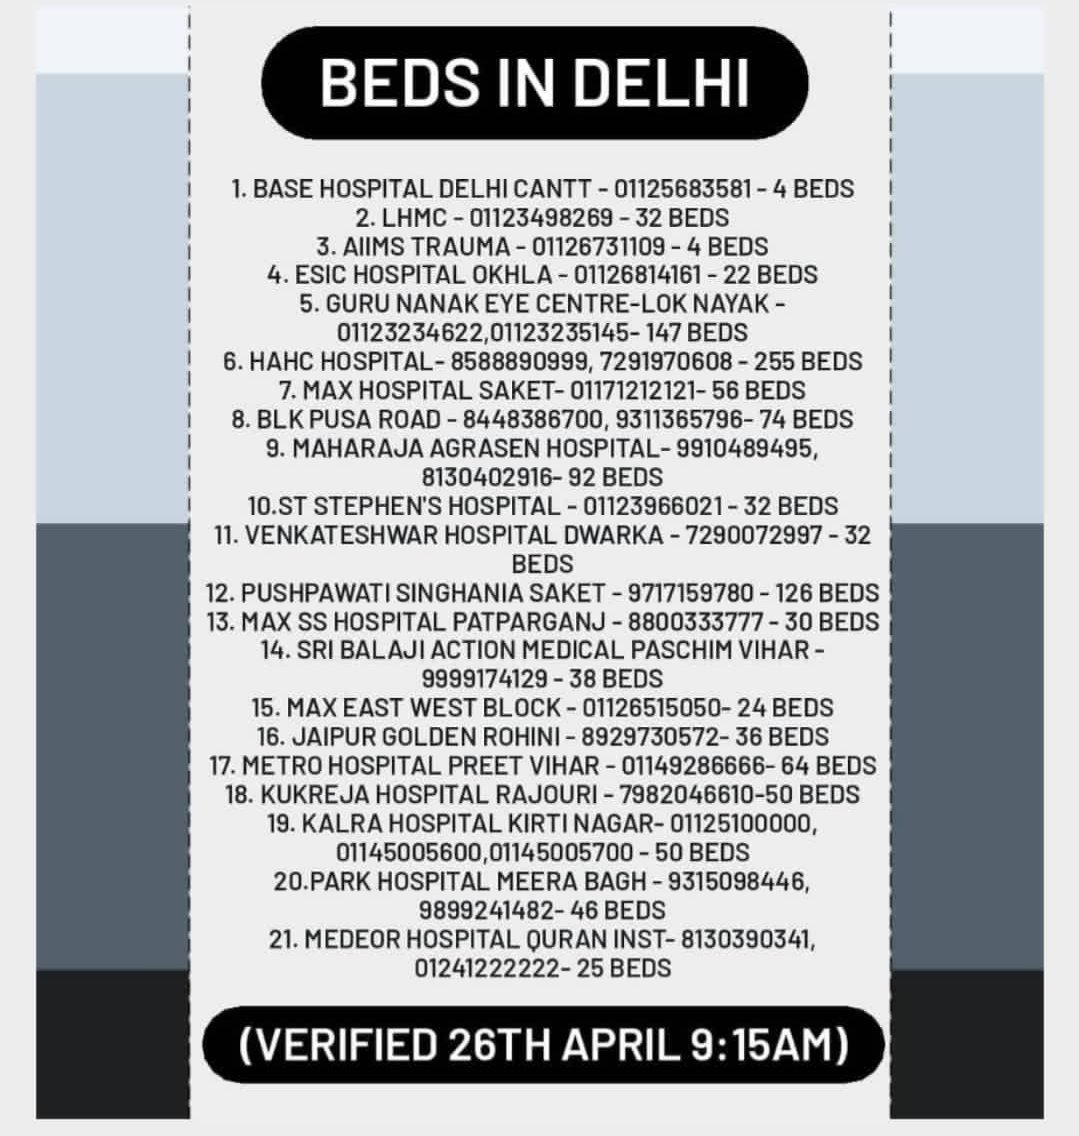 Beds available in Delhi